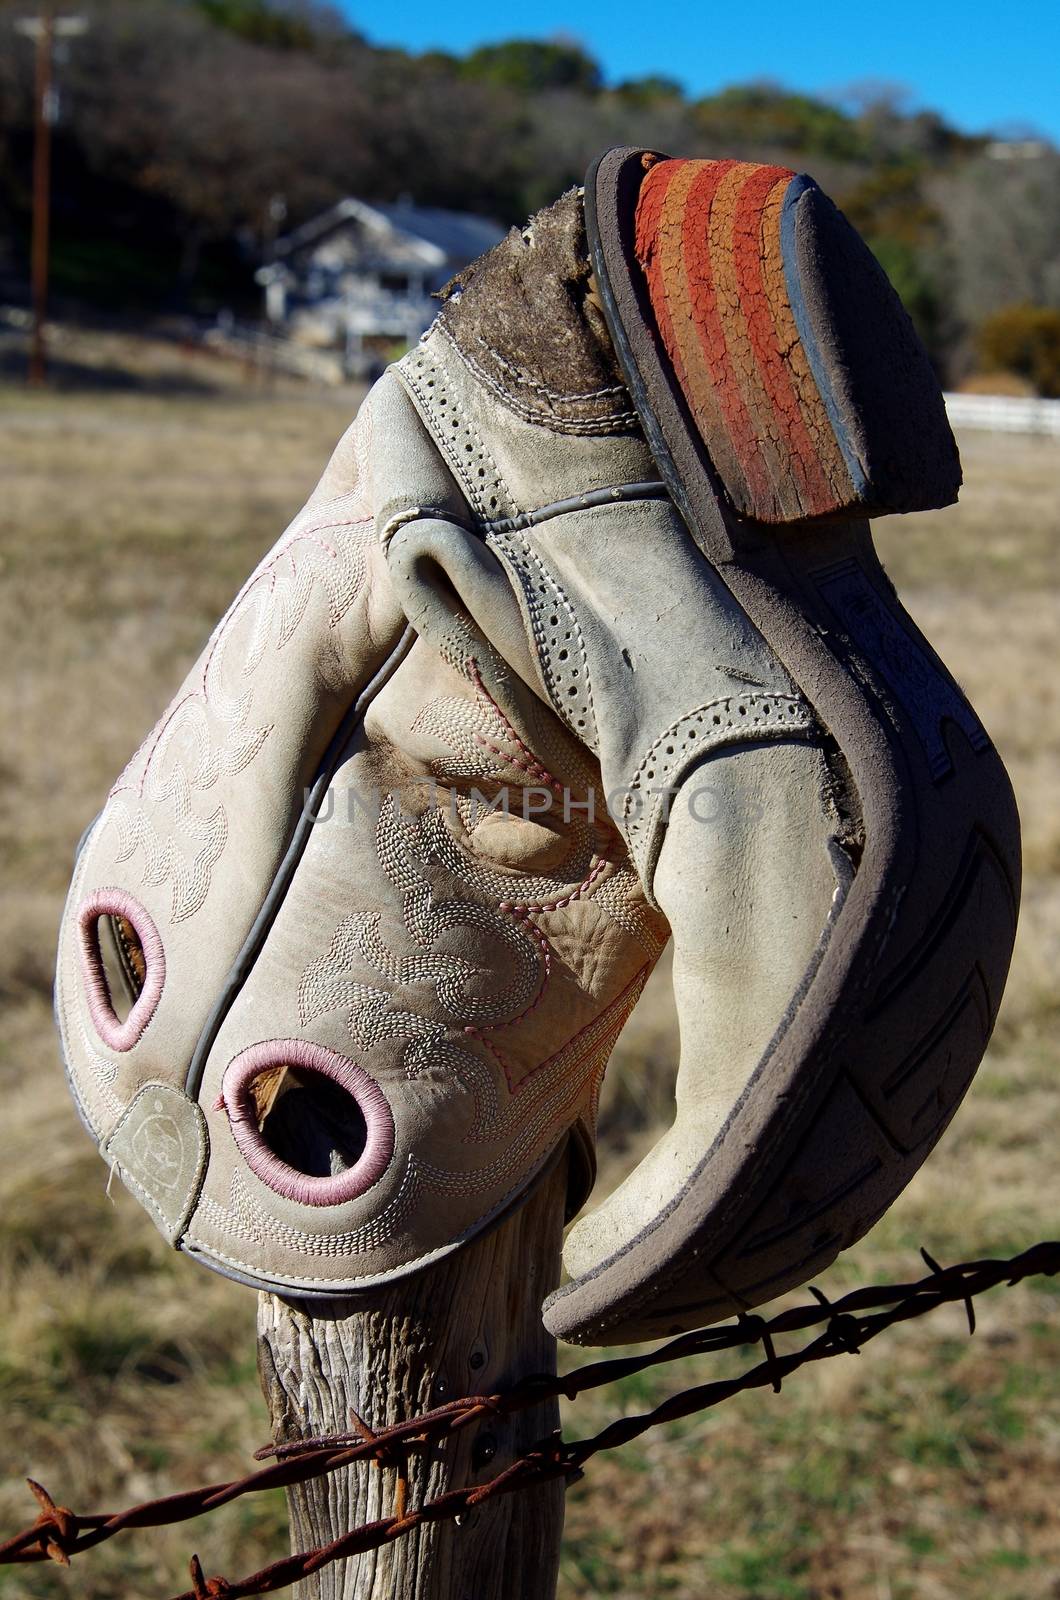 Cowboy boot stuck upside down on barbed wire fence post